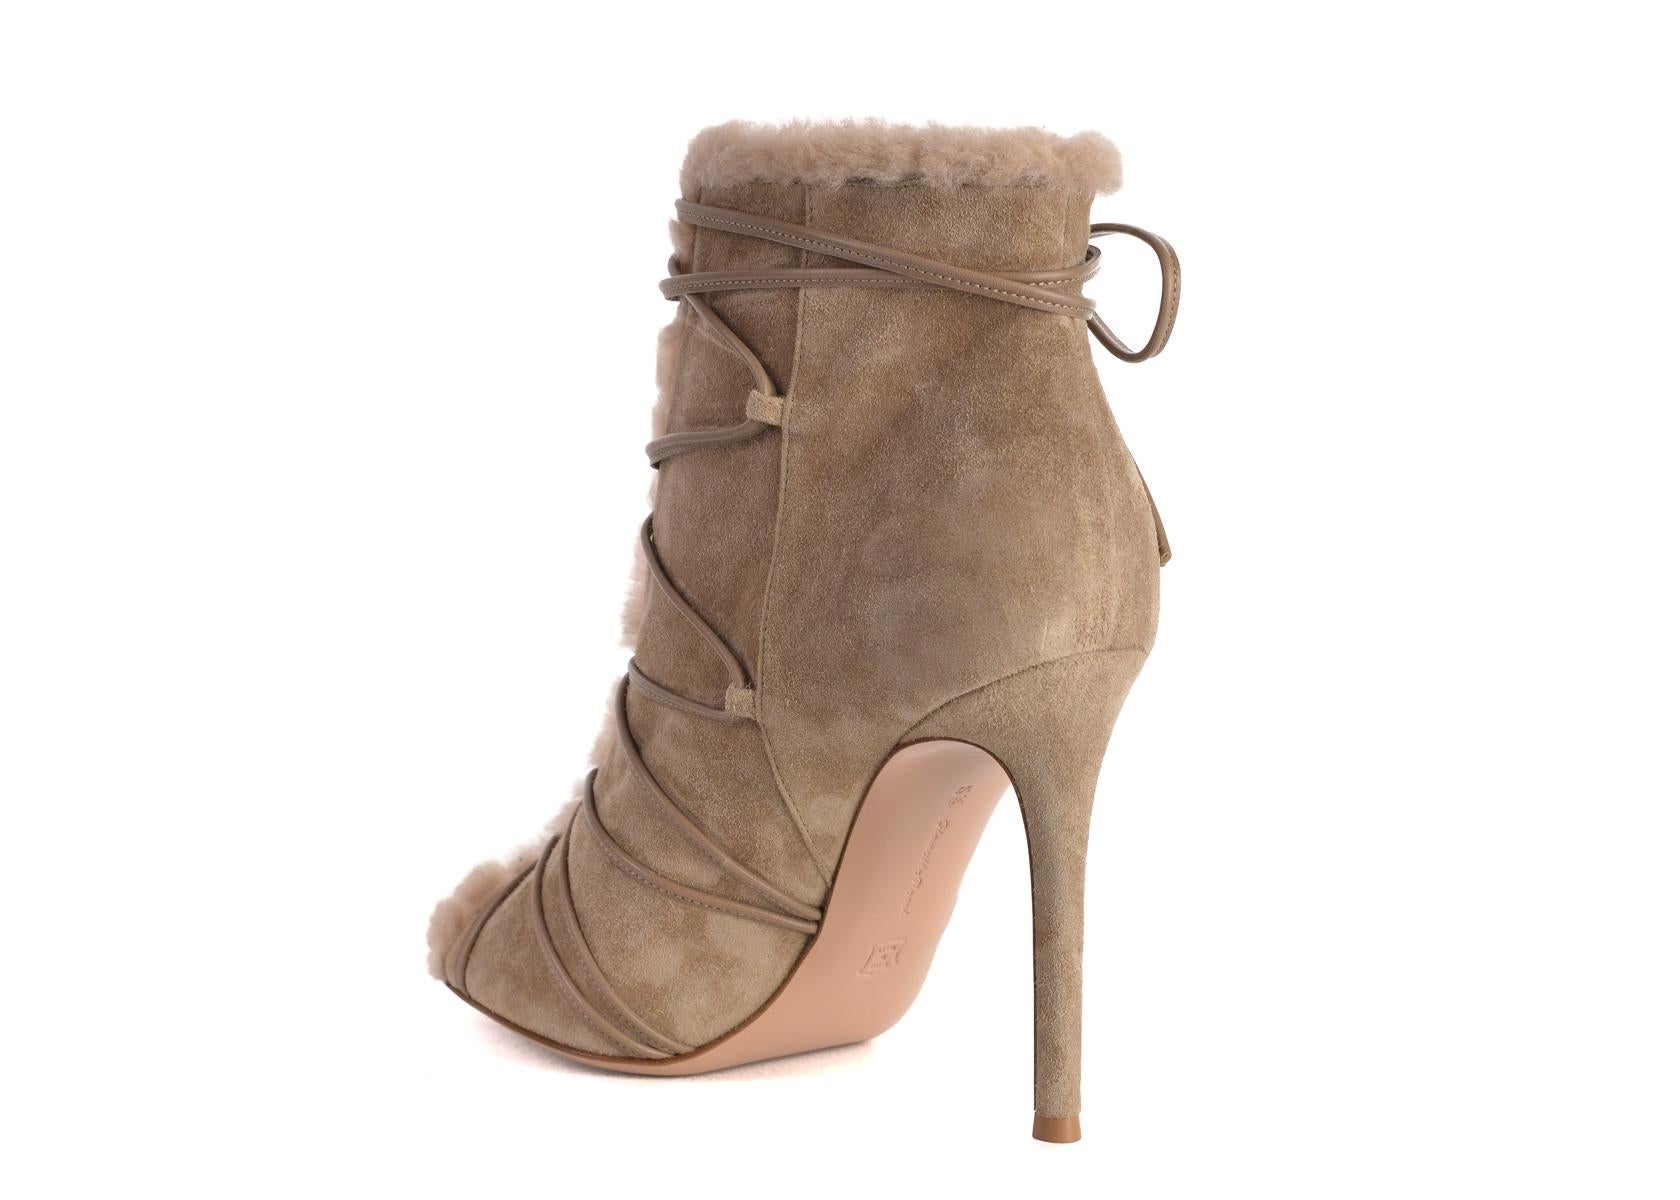 Gianvito Rossi Womens Aspen Brown Suede Ankle Boots Size IT35.5/US5.5~RTL$1235 In New Condition For Sale In Brooklyn, NY